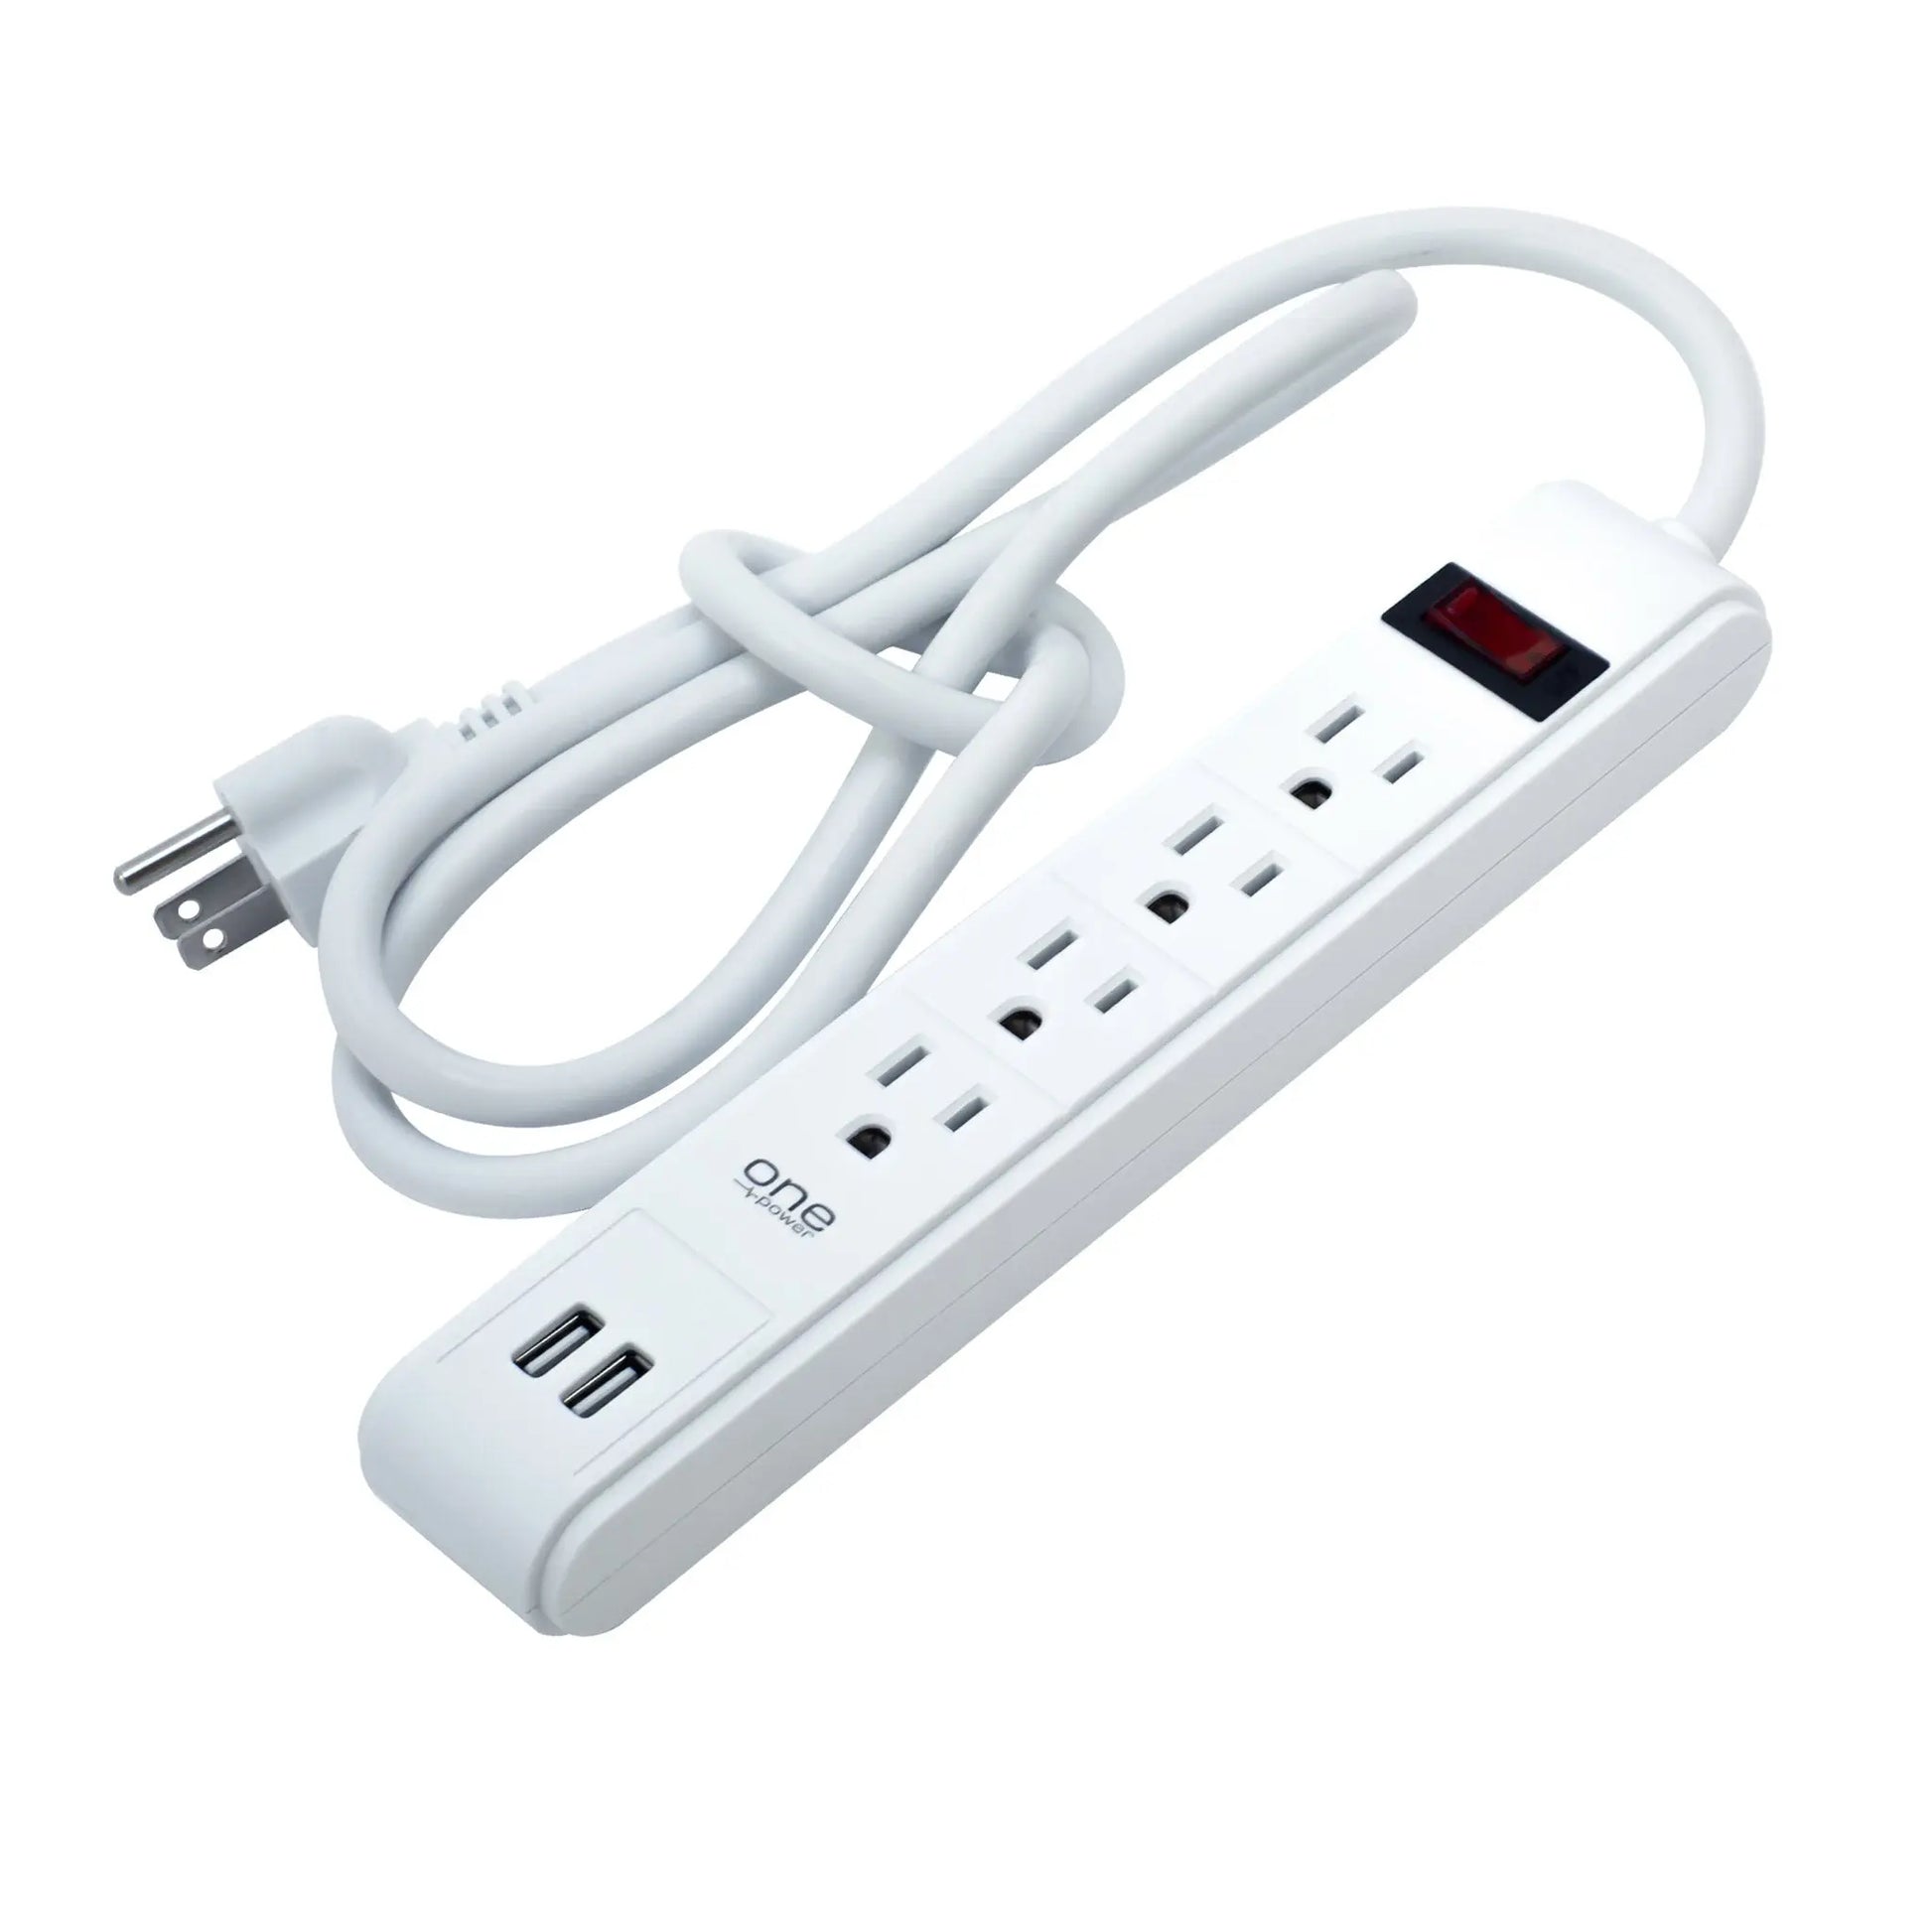 4 Outlet, 2 USB-A Surge Protector Power Strip with 450 Joules Protection (PSS421) freeshipping - One Products